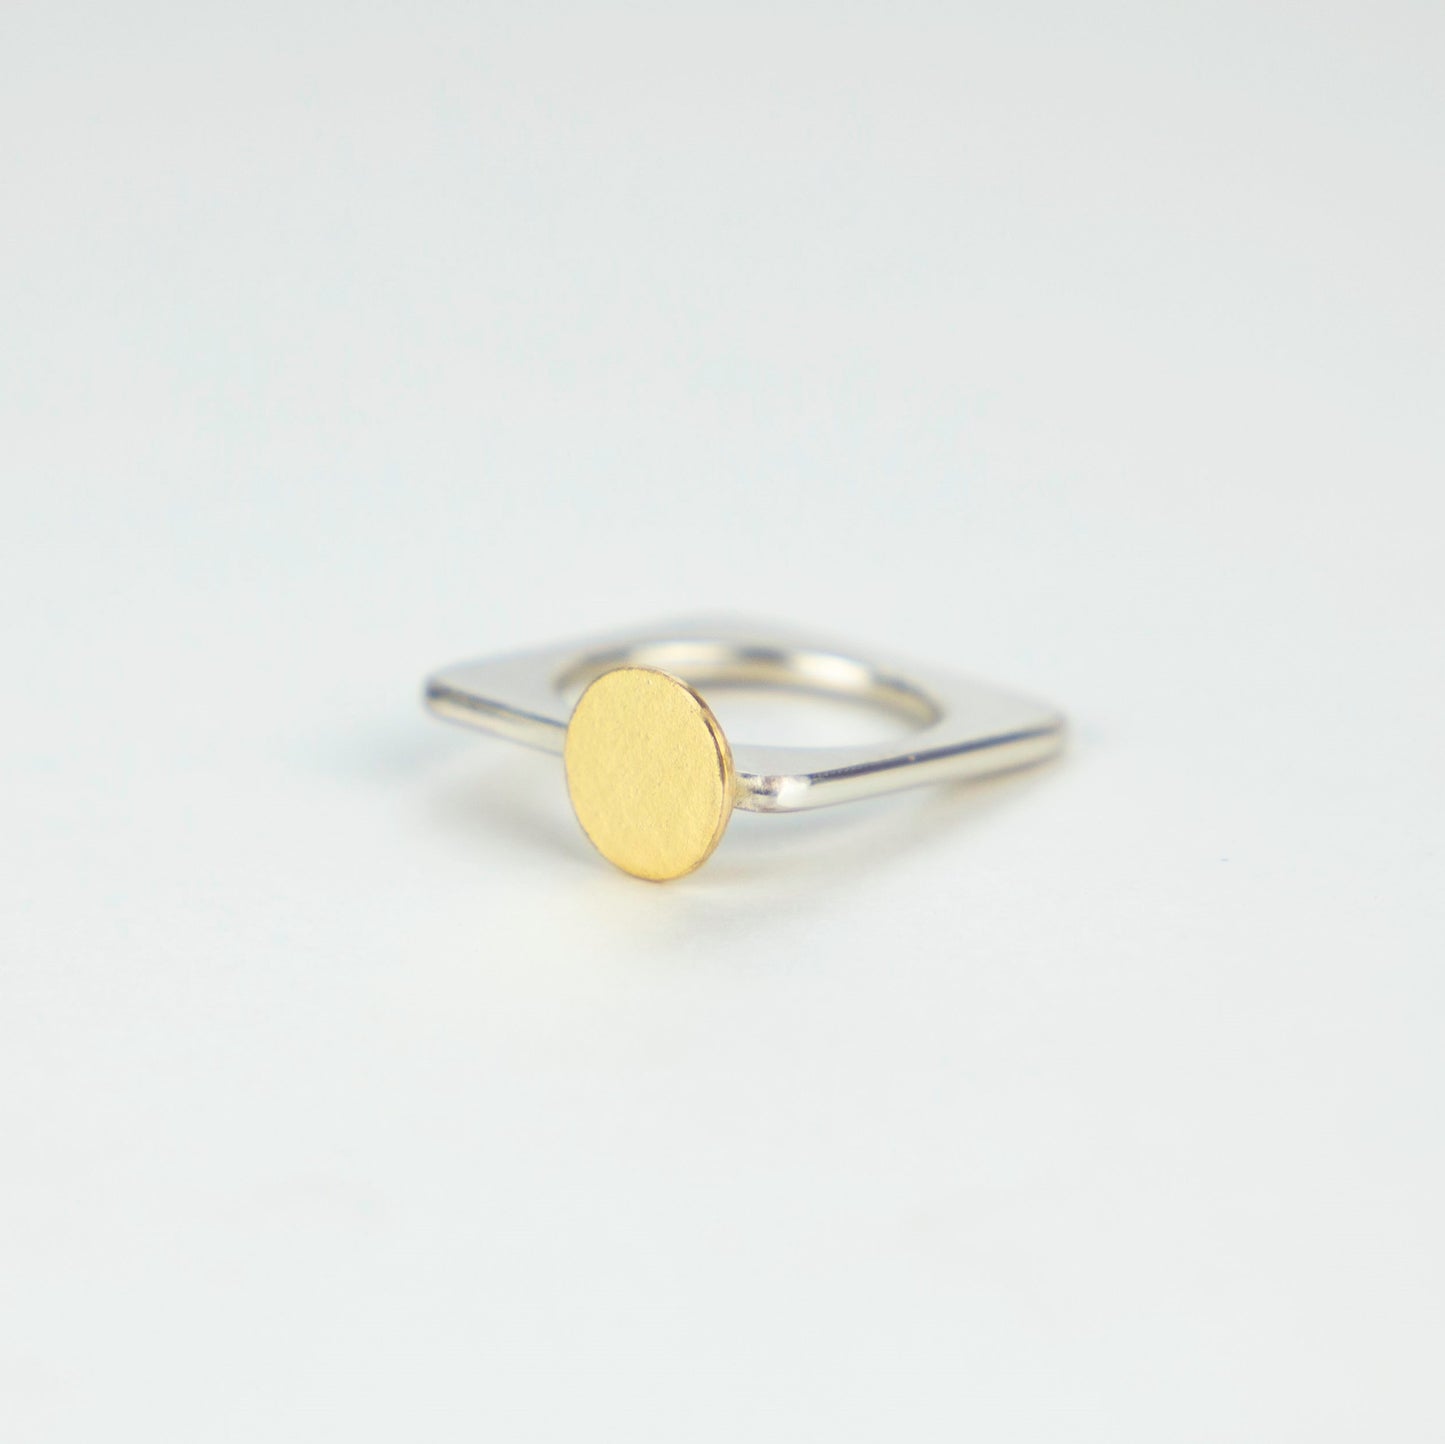 A square ring in silver with a gold disc or 'Moon'.